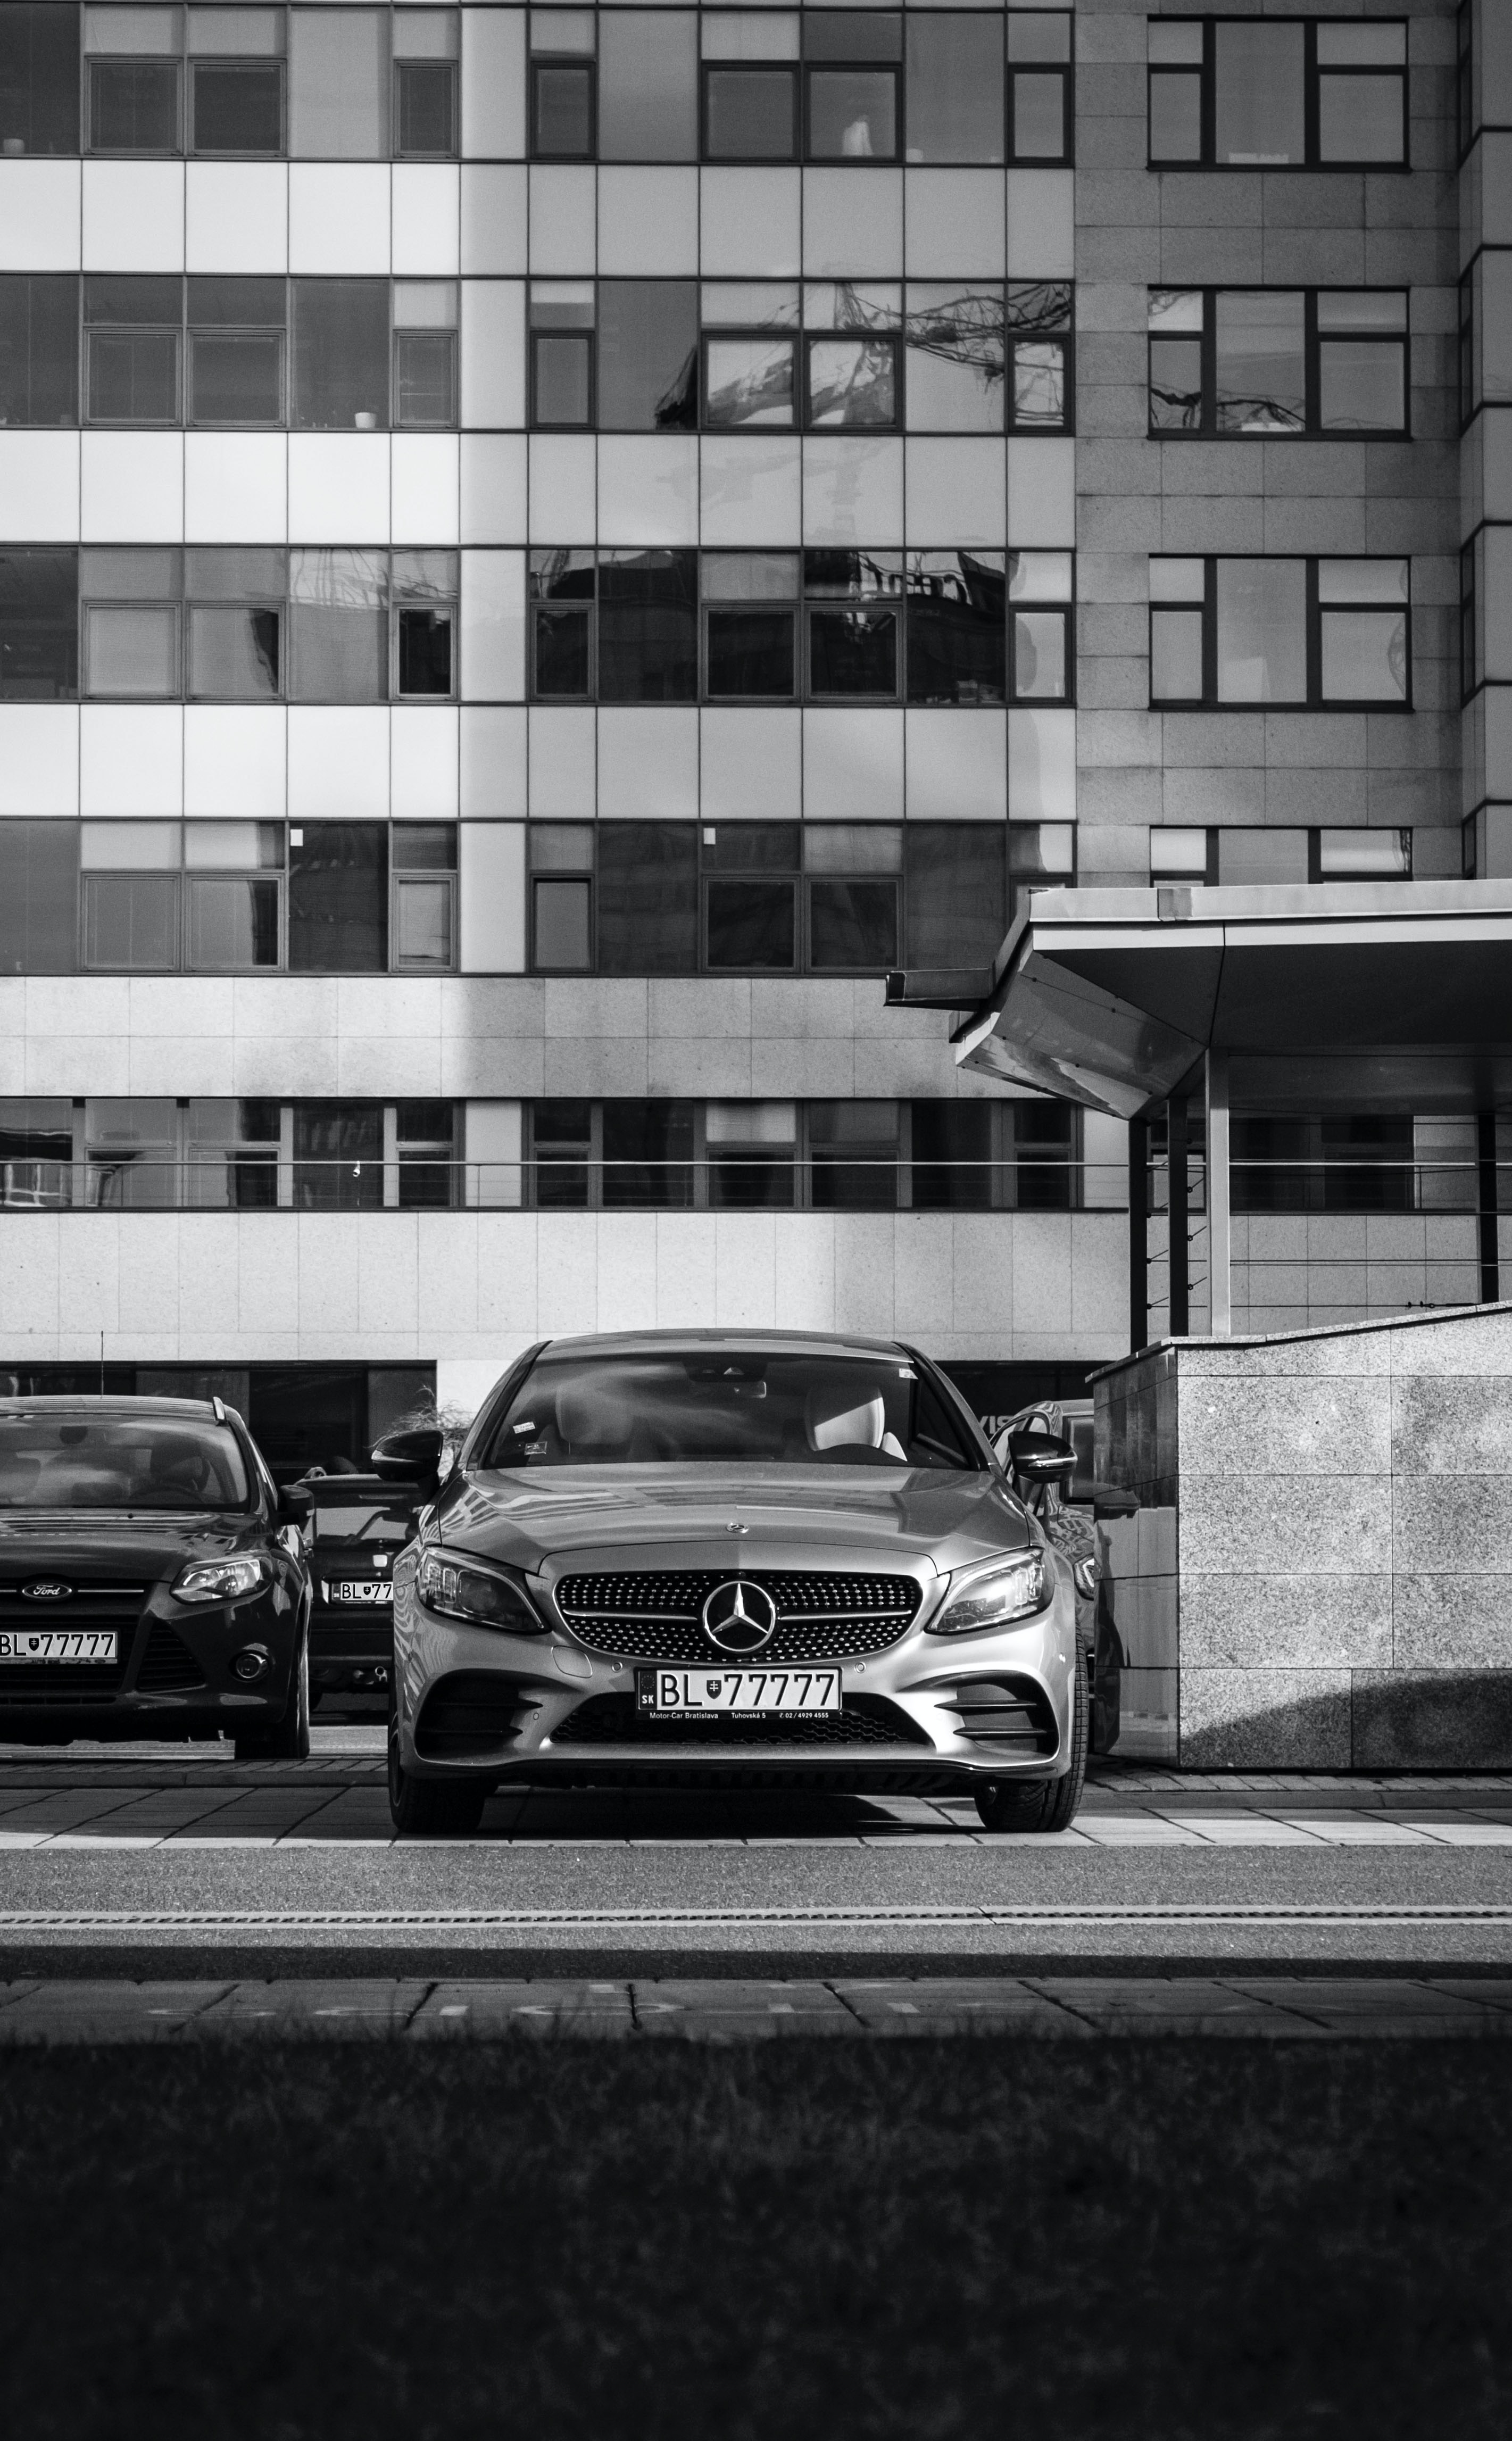 mercedes benz, cars, car, front view, bw, chb images